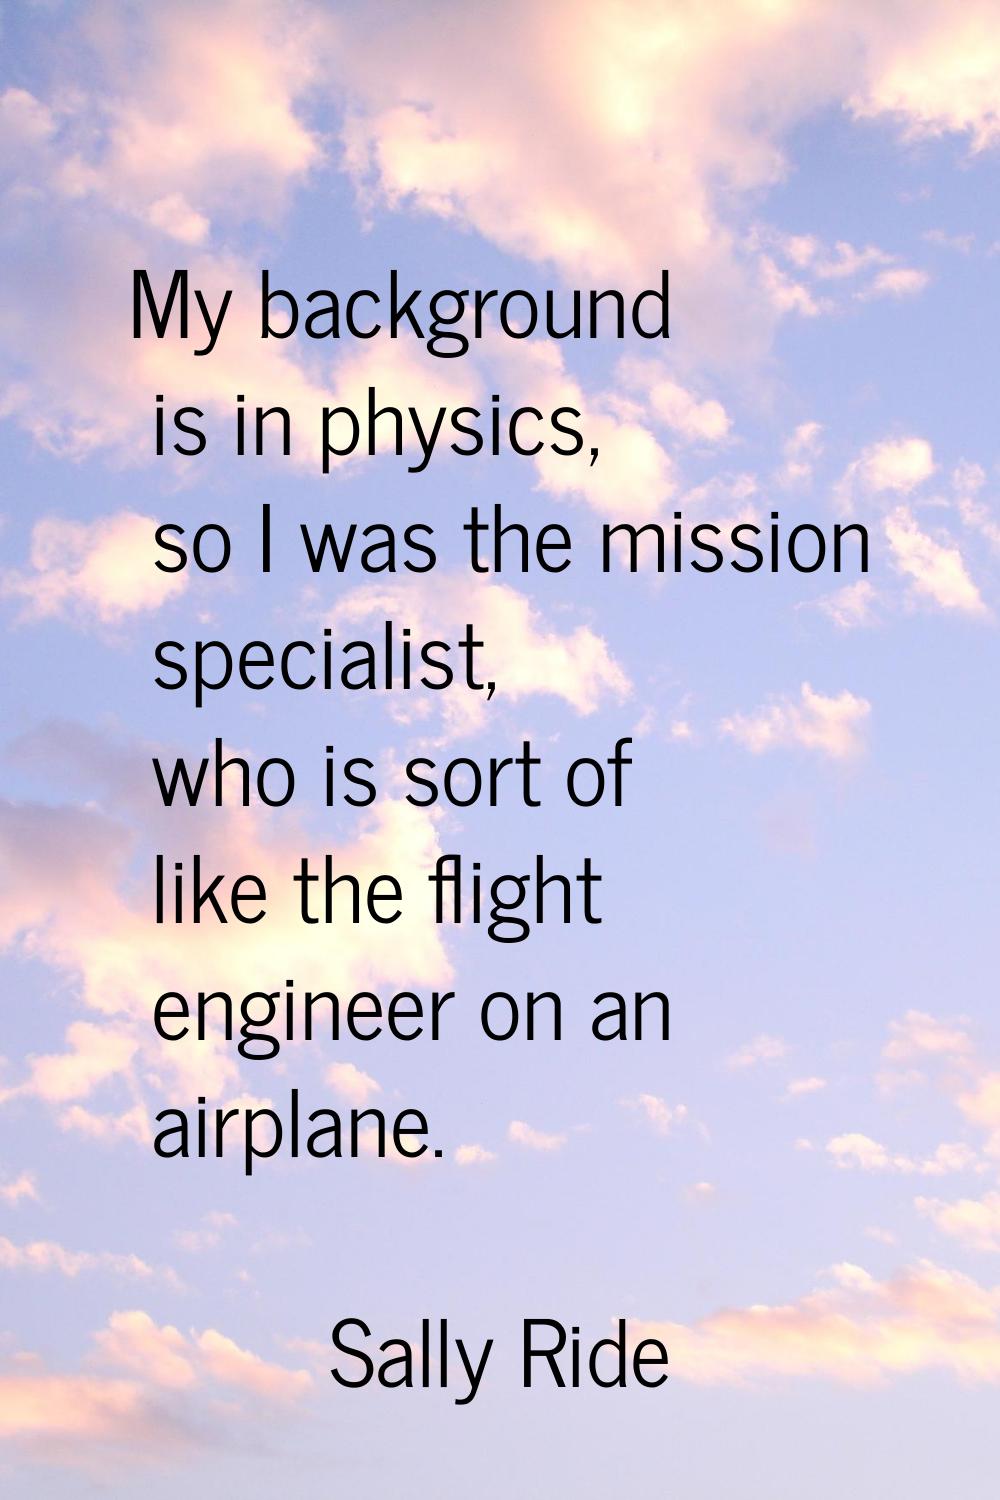 My background is in physics, so I was the mission specialist, who is sort of like the flight engine